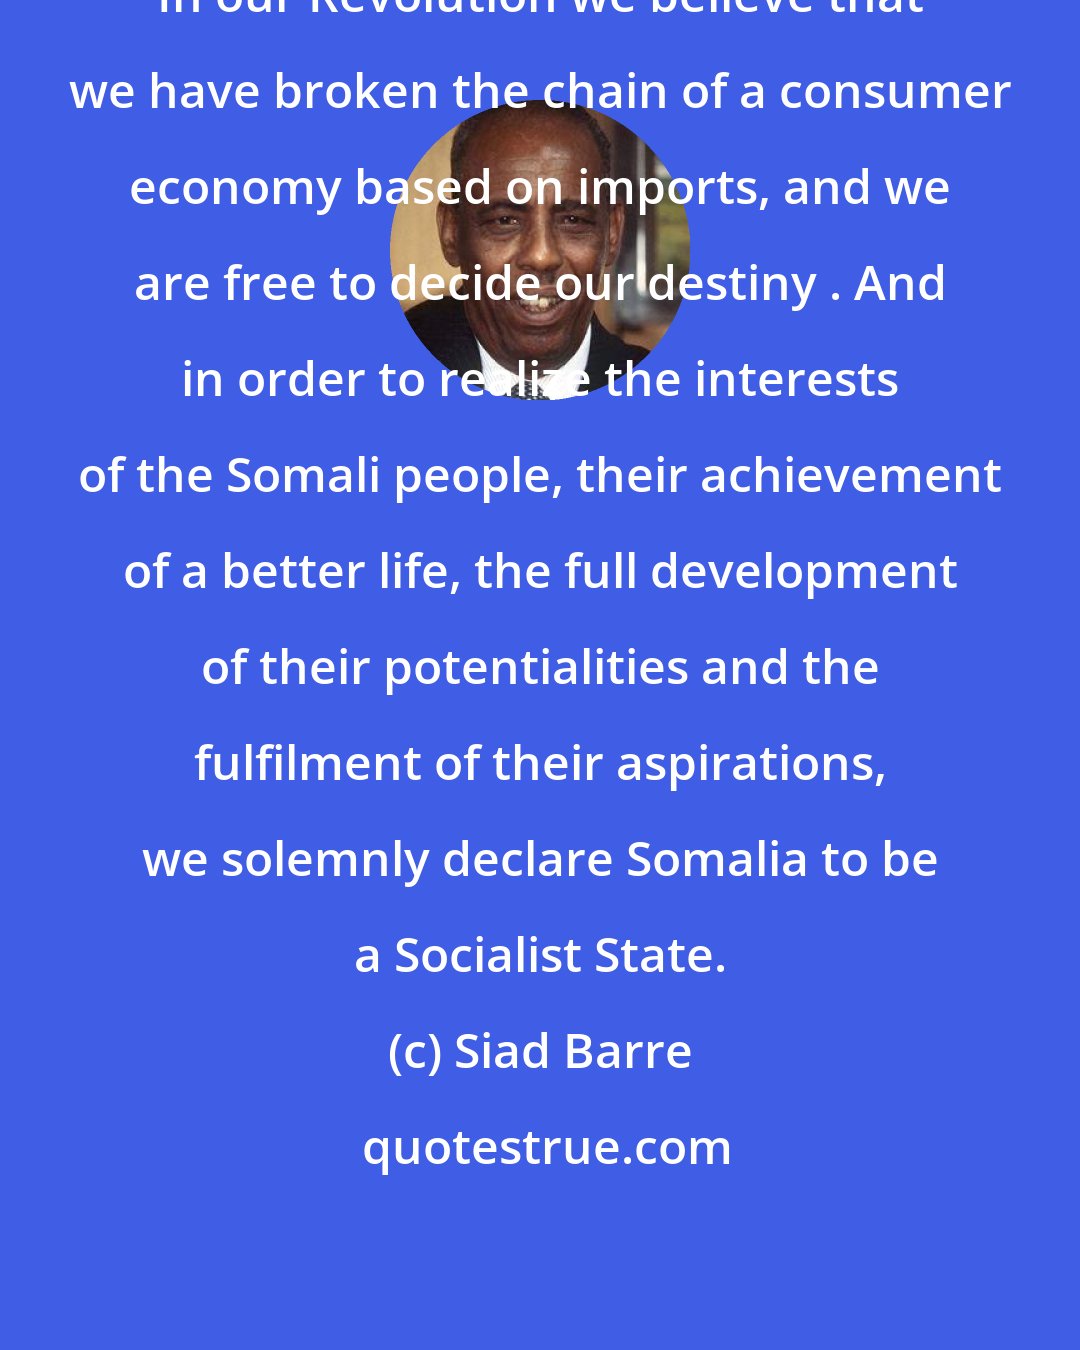 Siad Barre: In our Revolution we believe that we have broken the chain of a consumer economy based on imports, and we are free to decide our destiny . And in order to realize the interests of the Somali people, their achievement of a better life, the full development of their potentialities and the fulfilment of their aspirations, we solemnly declare Somalia to be a Socialist State.